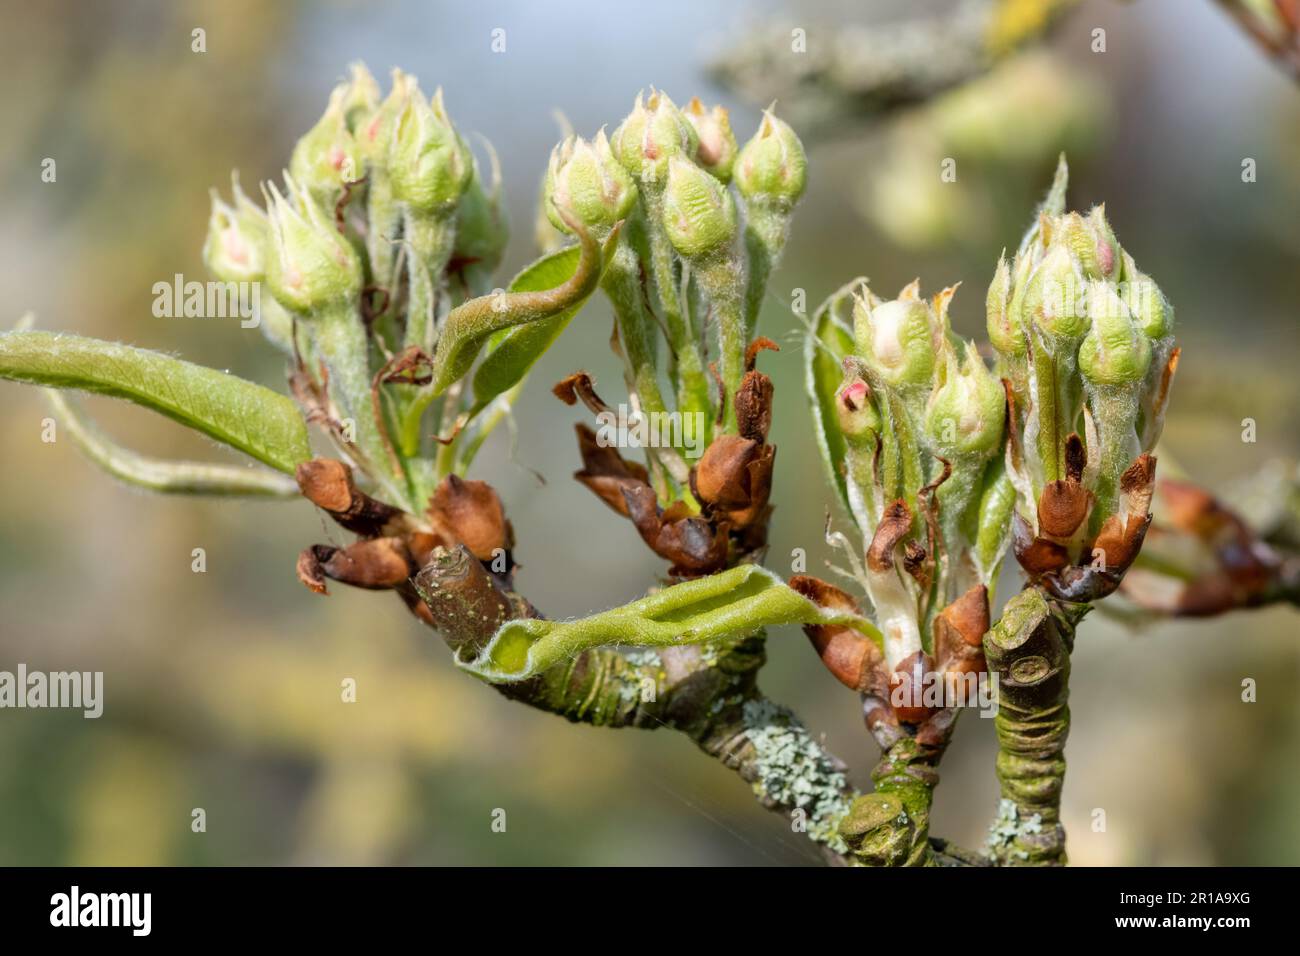 Close up of fruit buds at the green cluster growth stage on a conference pear tree Stock Photo